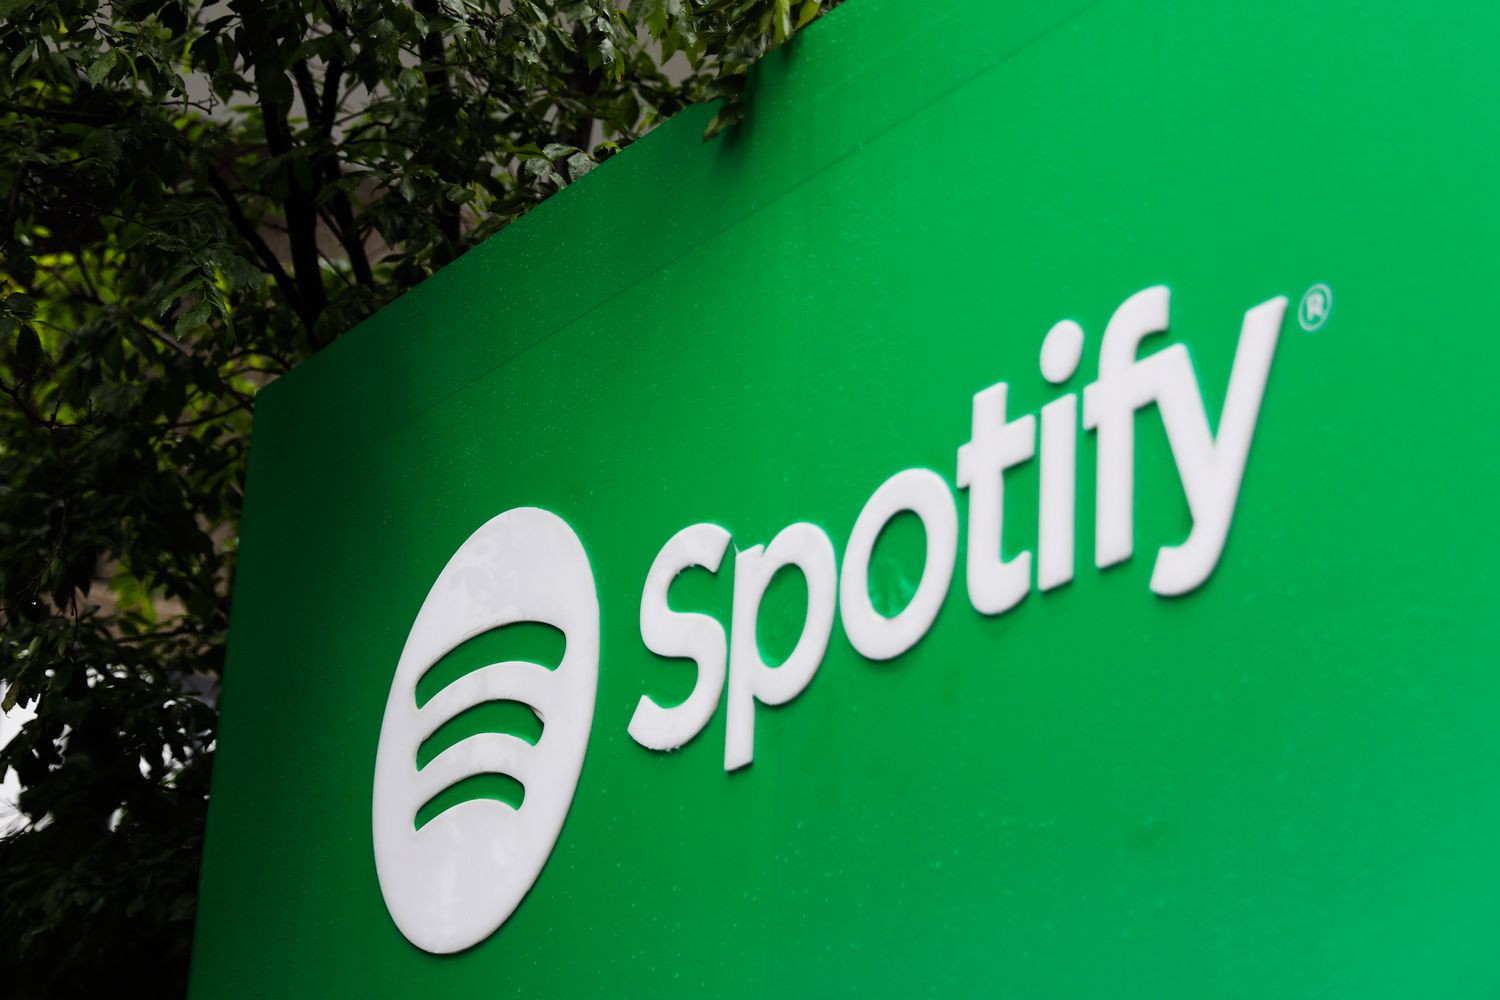 Spotify Shakes Up Streaming With Price Hikes: What It Means for Your Music and Podcasts